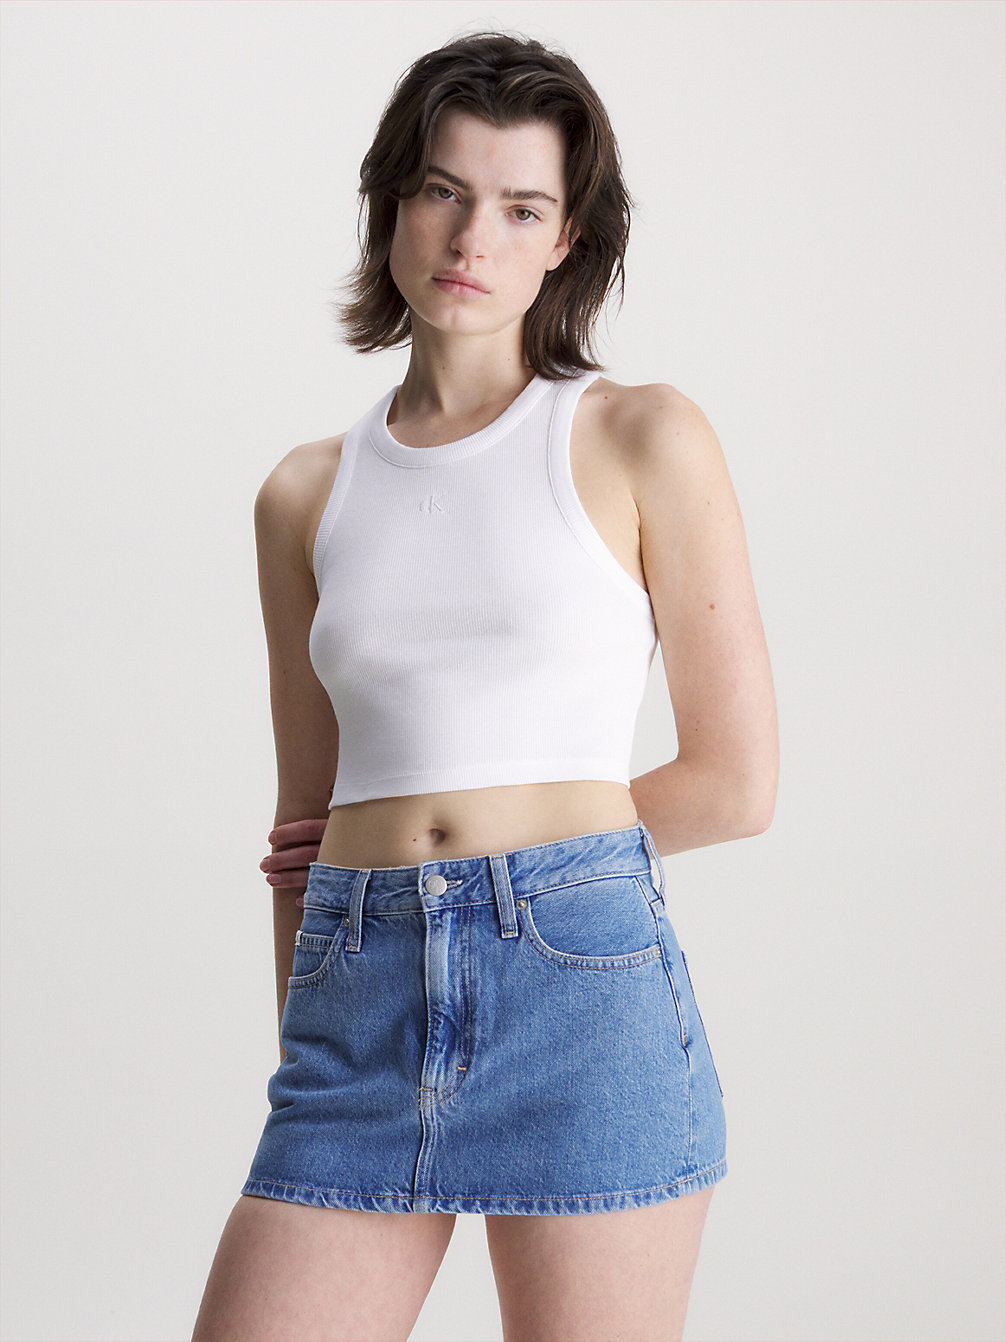 BRIGHT WHITE Cropped Racer Back Tank Top undefined women Calvin Klein